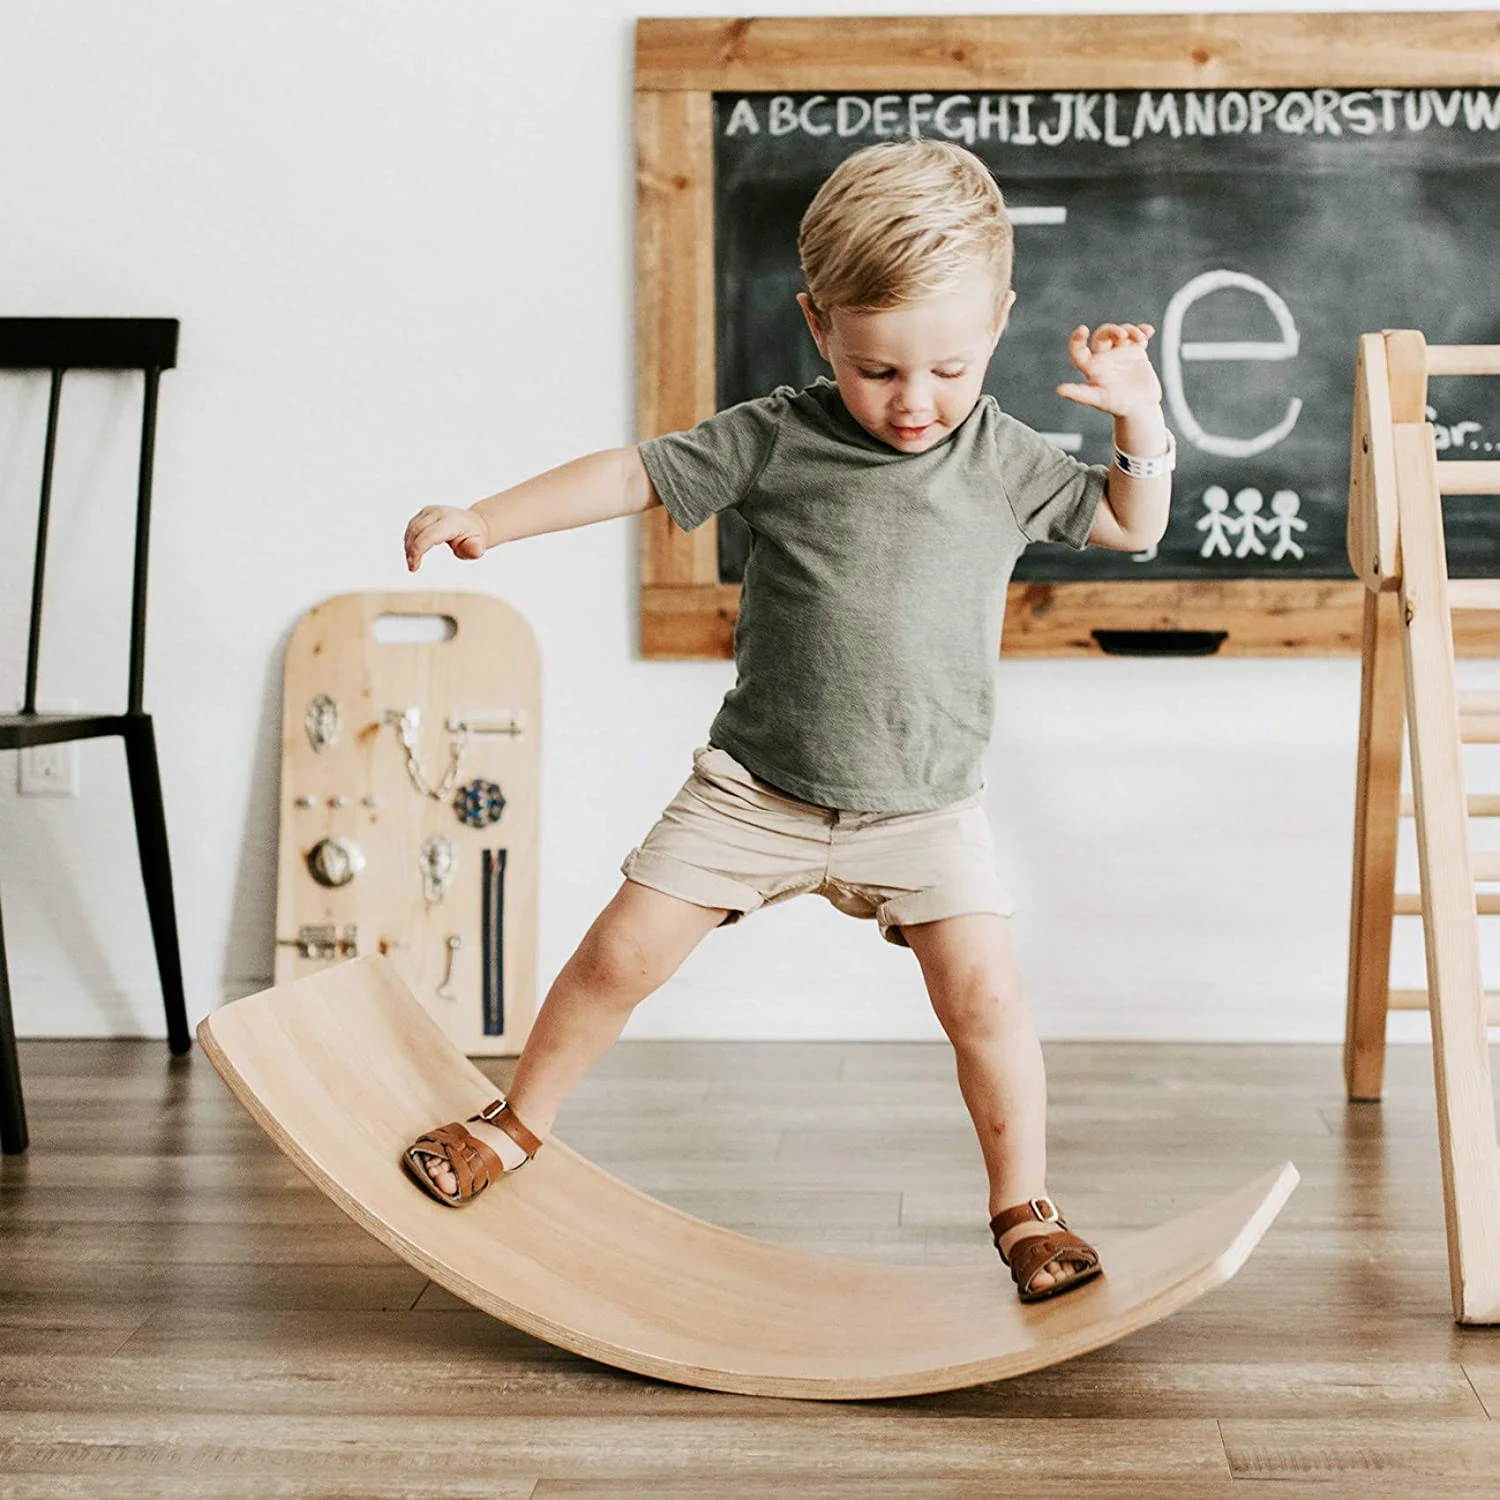 

Winning New Wooden Balance Board for Kids Rocker Wobble Yoga Curvy Seesaw Board Natural Wood Montessori Toys Games for Toddlers, Natural wood/rainbow colors/oem